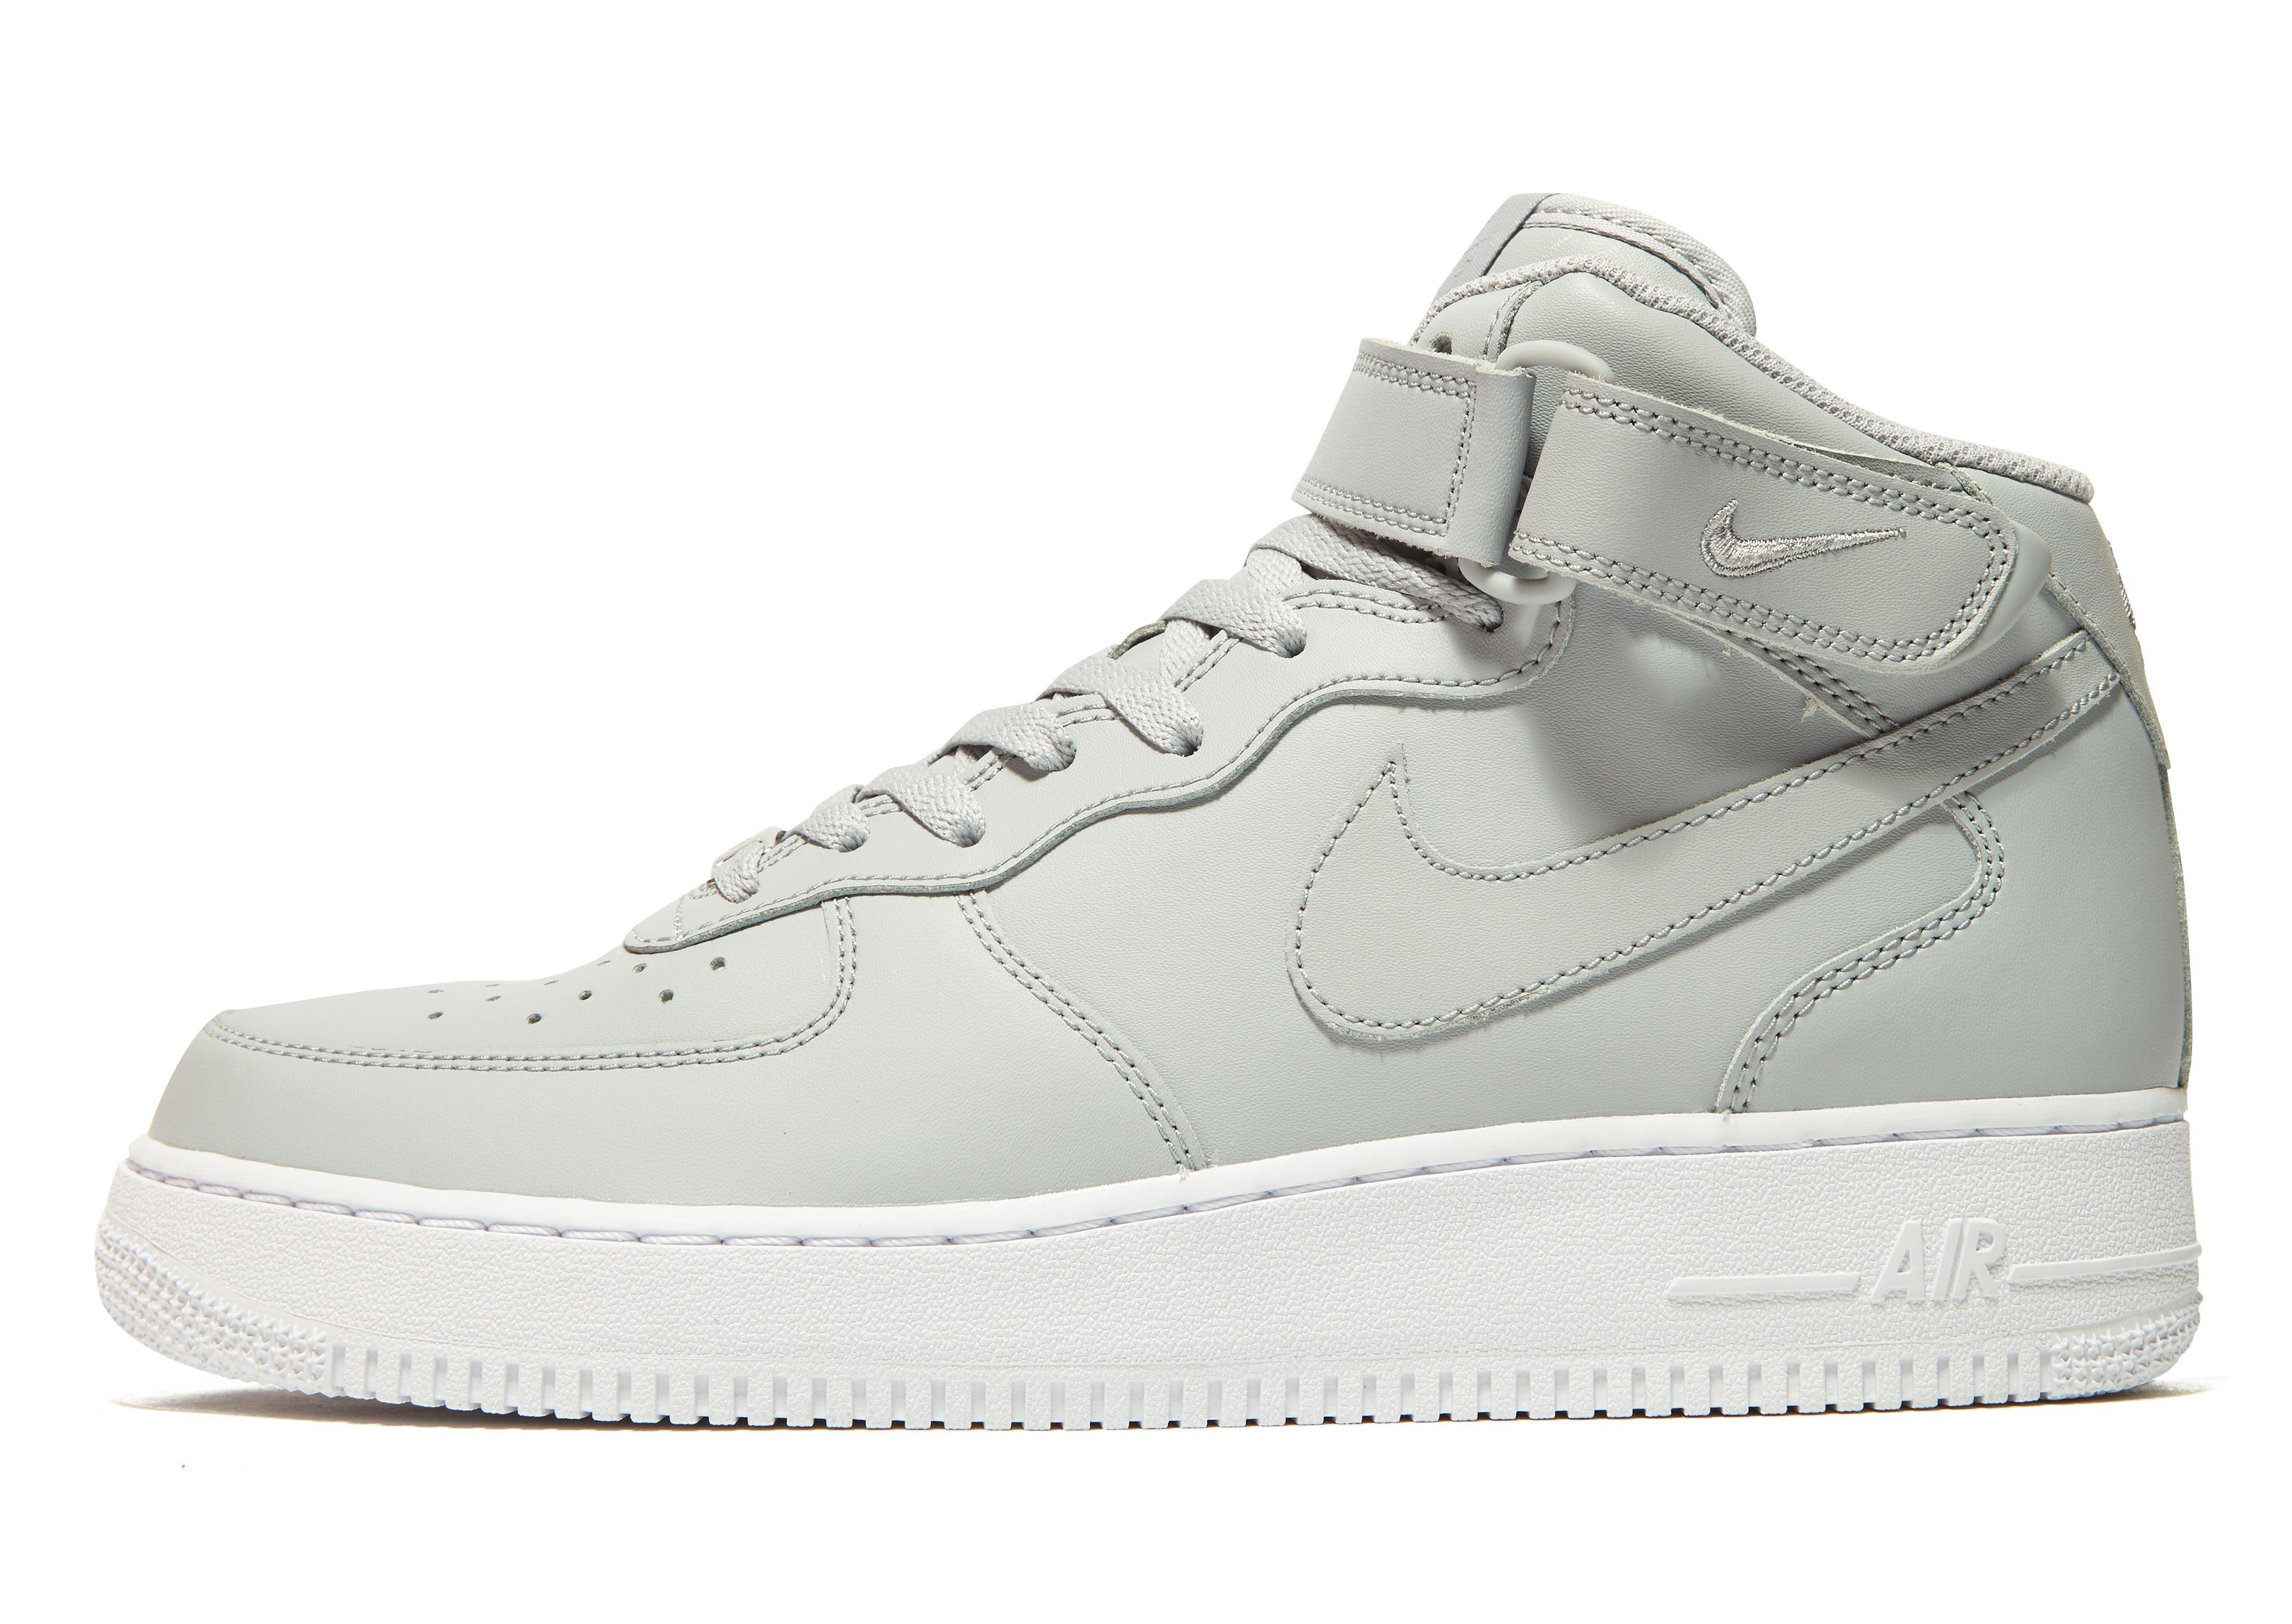 Nike Leather Af1 Mid W Gy/w Gy in White Grey (Grey) for Men - Lyst